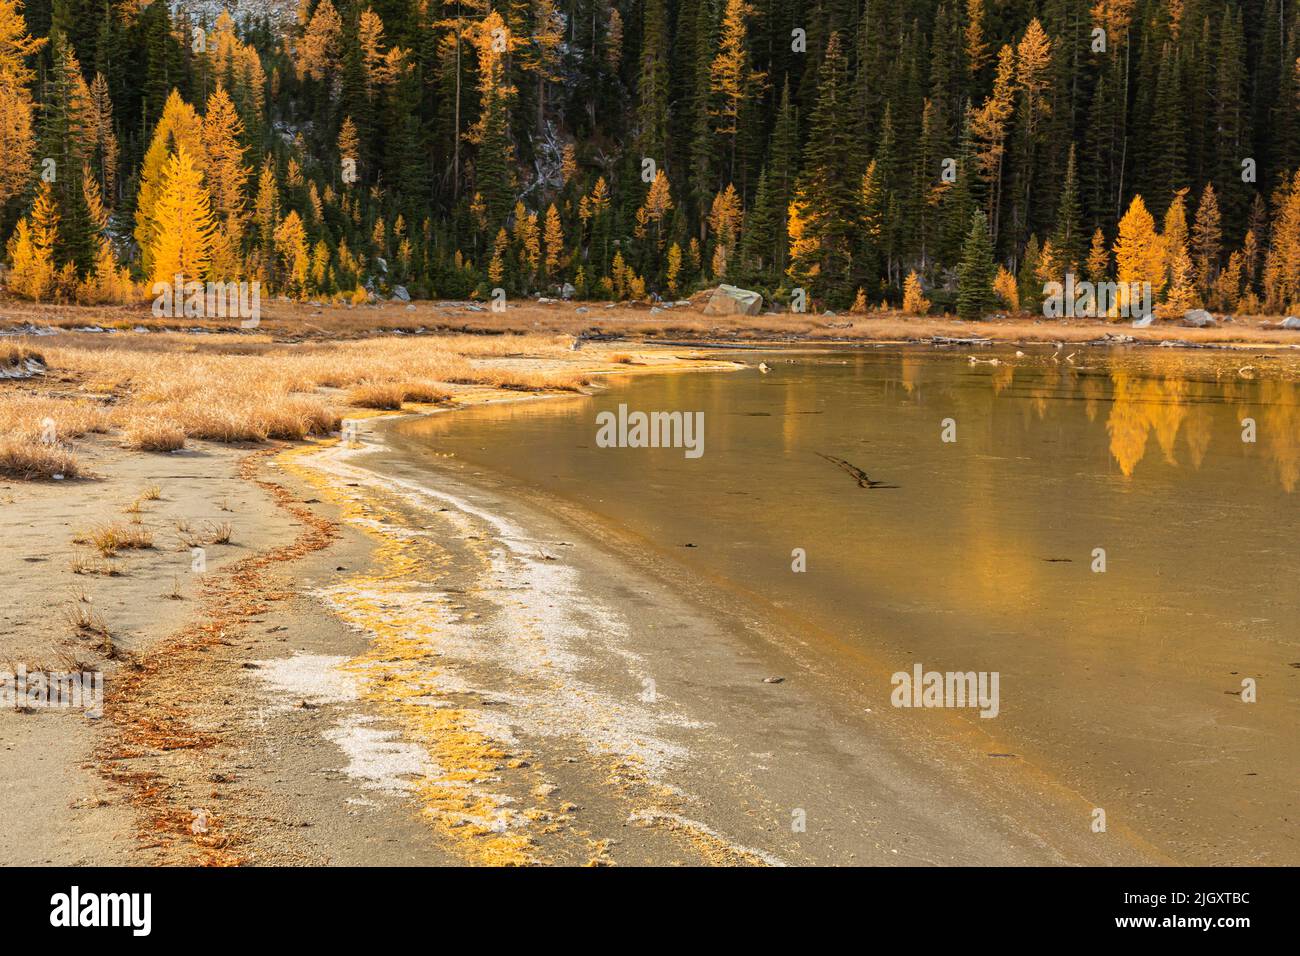 WA21729-00...WASHINGTON - Lines of fir and larch needles on the shore of Larch Lake in the Glacier Peak Wilderness area. Stock Photo